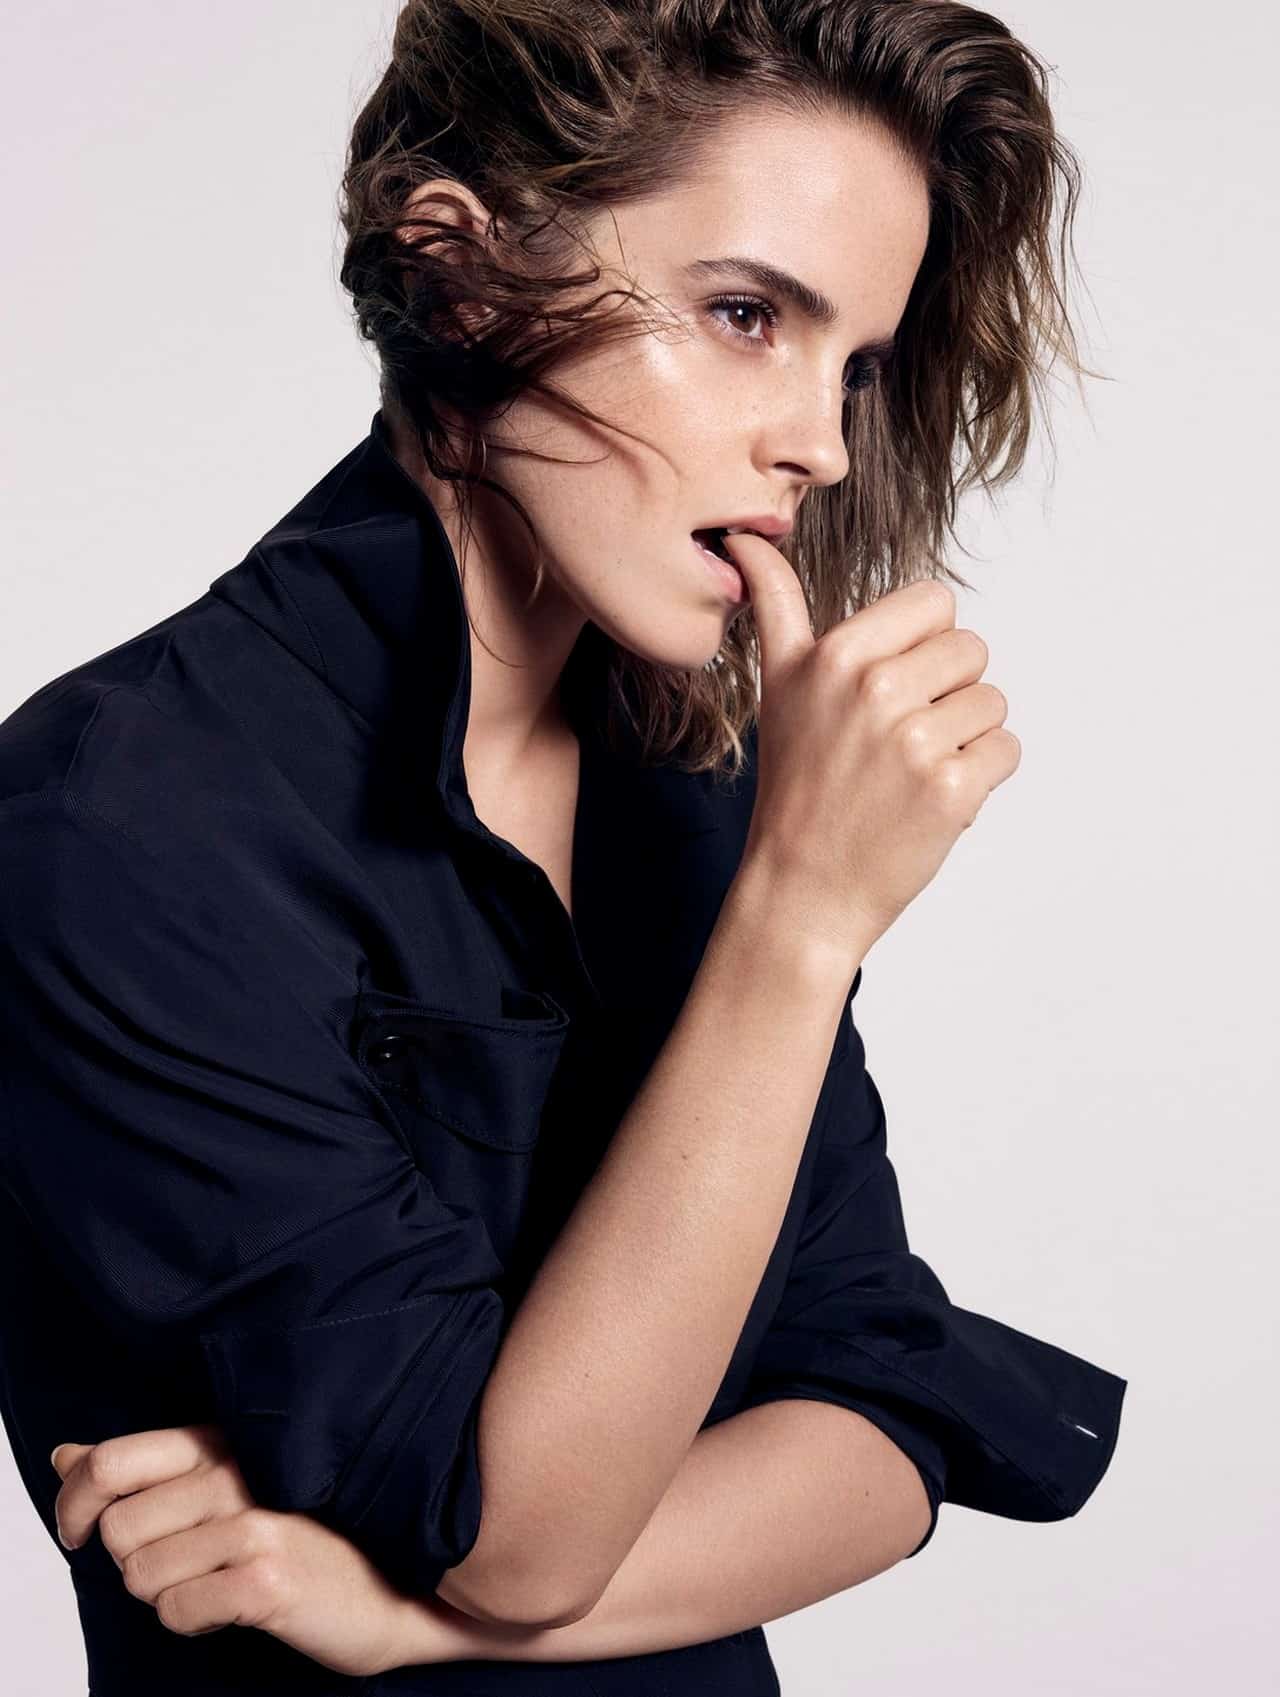 Emma Watson is ELLE's Cover Star and "Woman Of The Year"